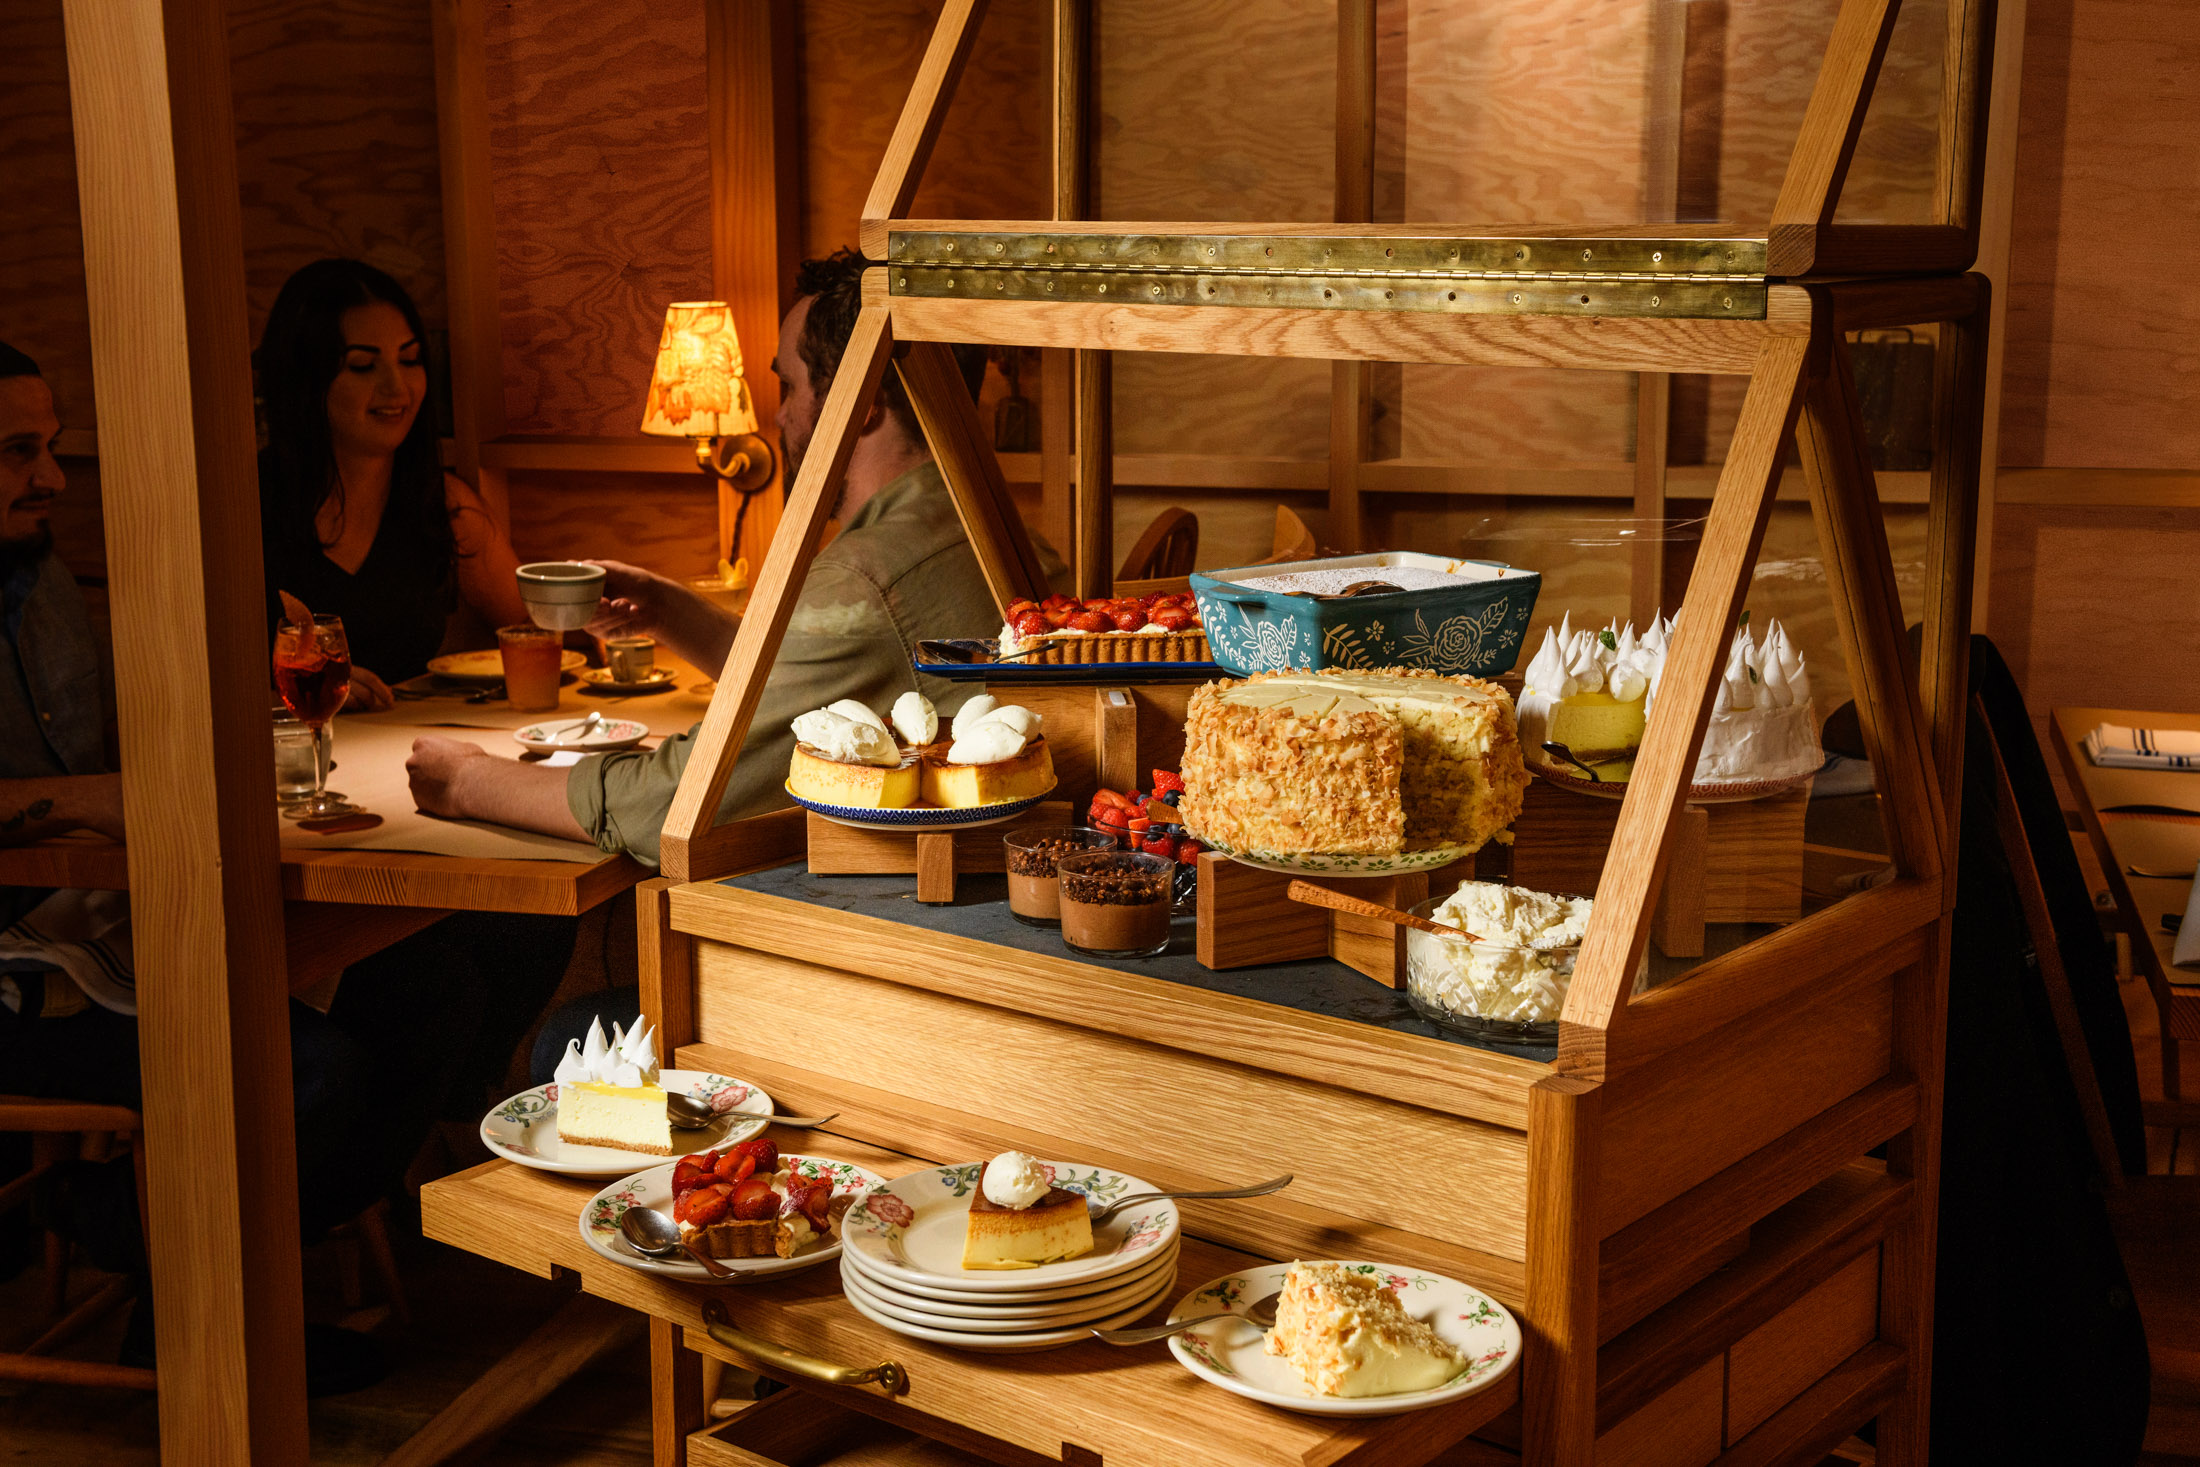 Classic Tableside Carts Are Taking Over New York City Restaurants -  Bloomberg